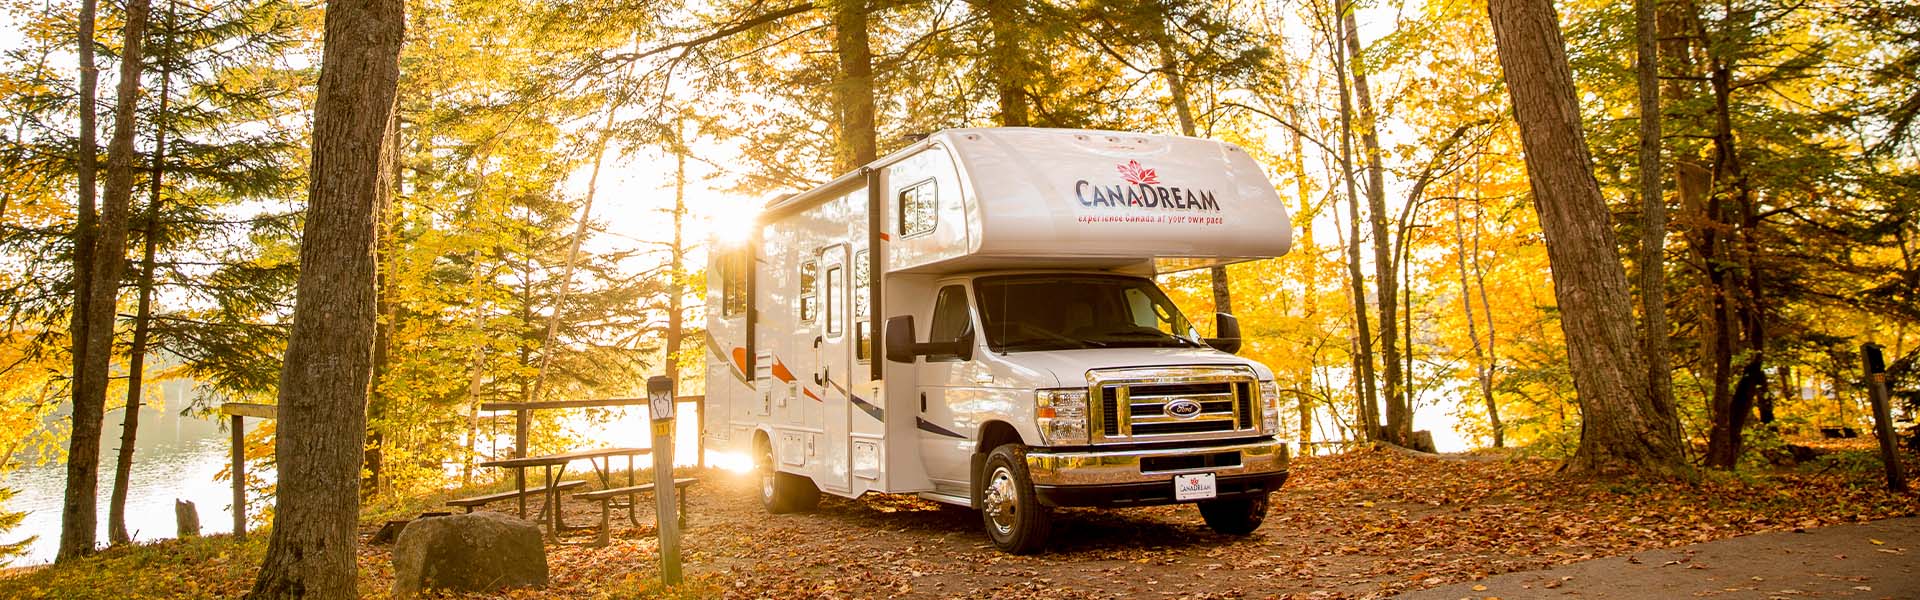 Hire a motorhome in Canada with Canadream